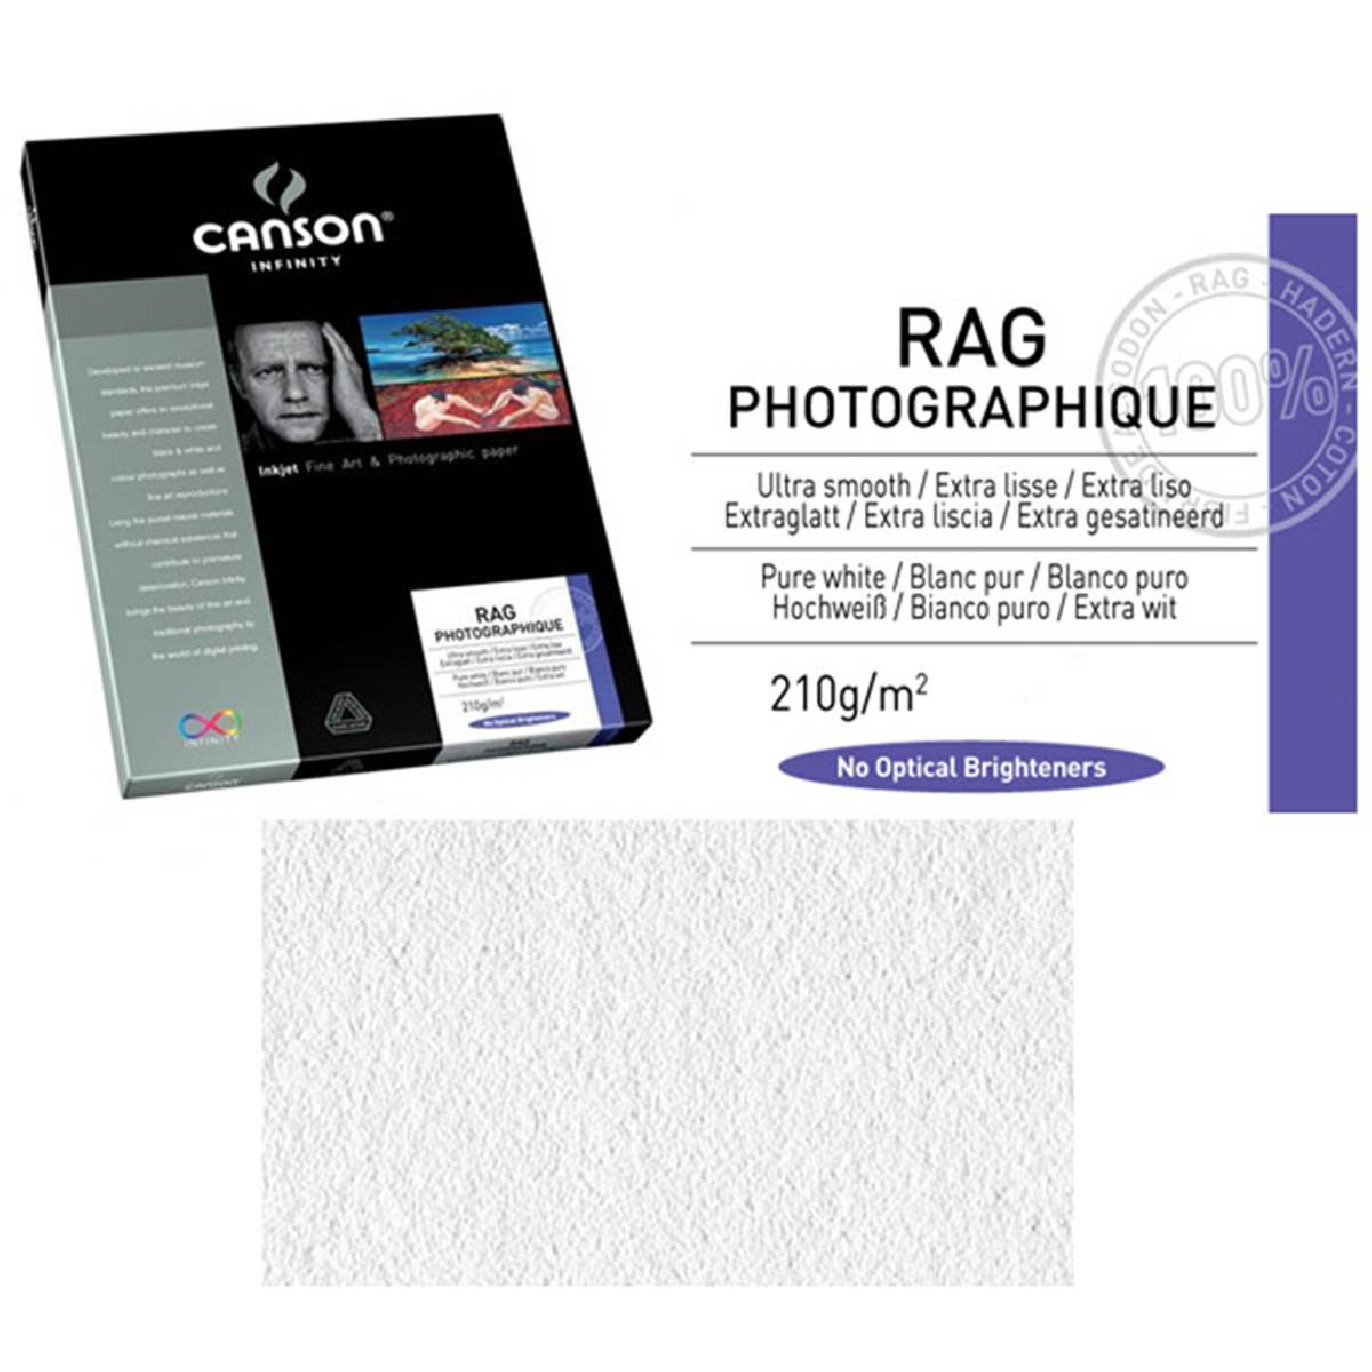 Papier CANSON INFINITY Arches® 88 310g A3 25 feuilles